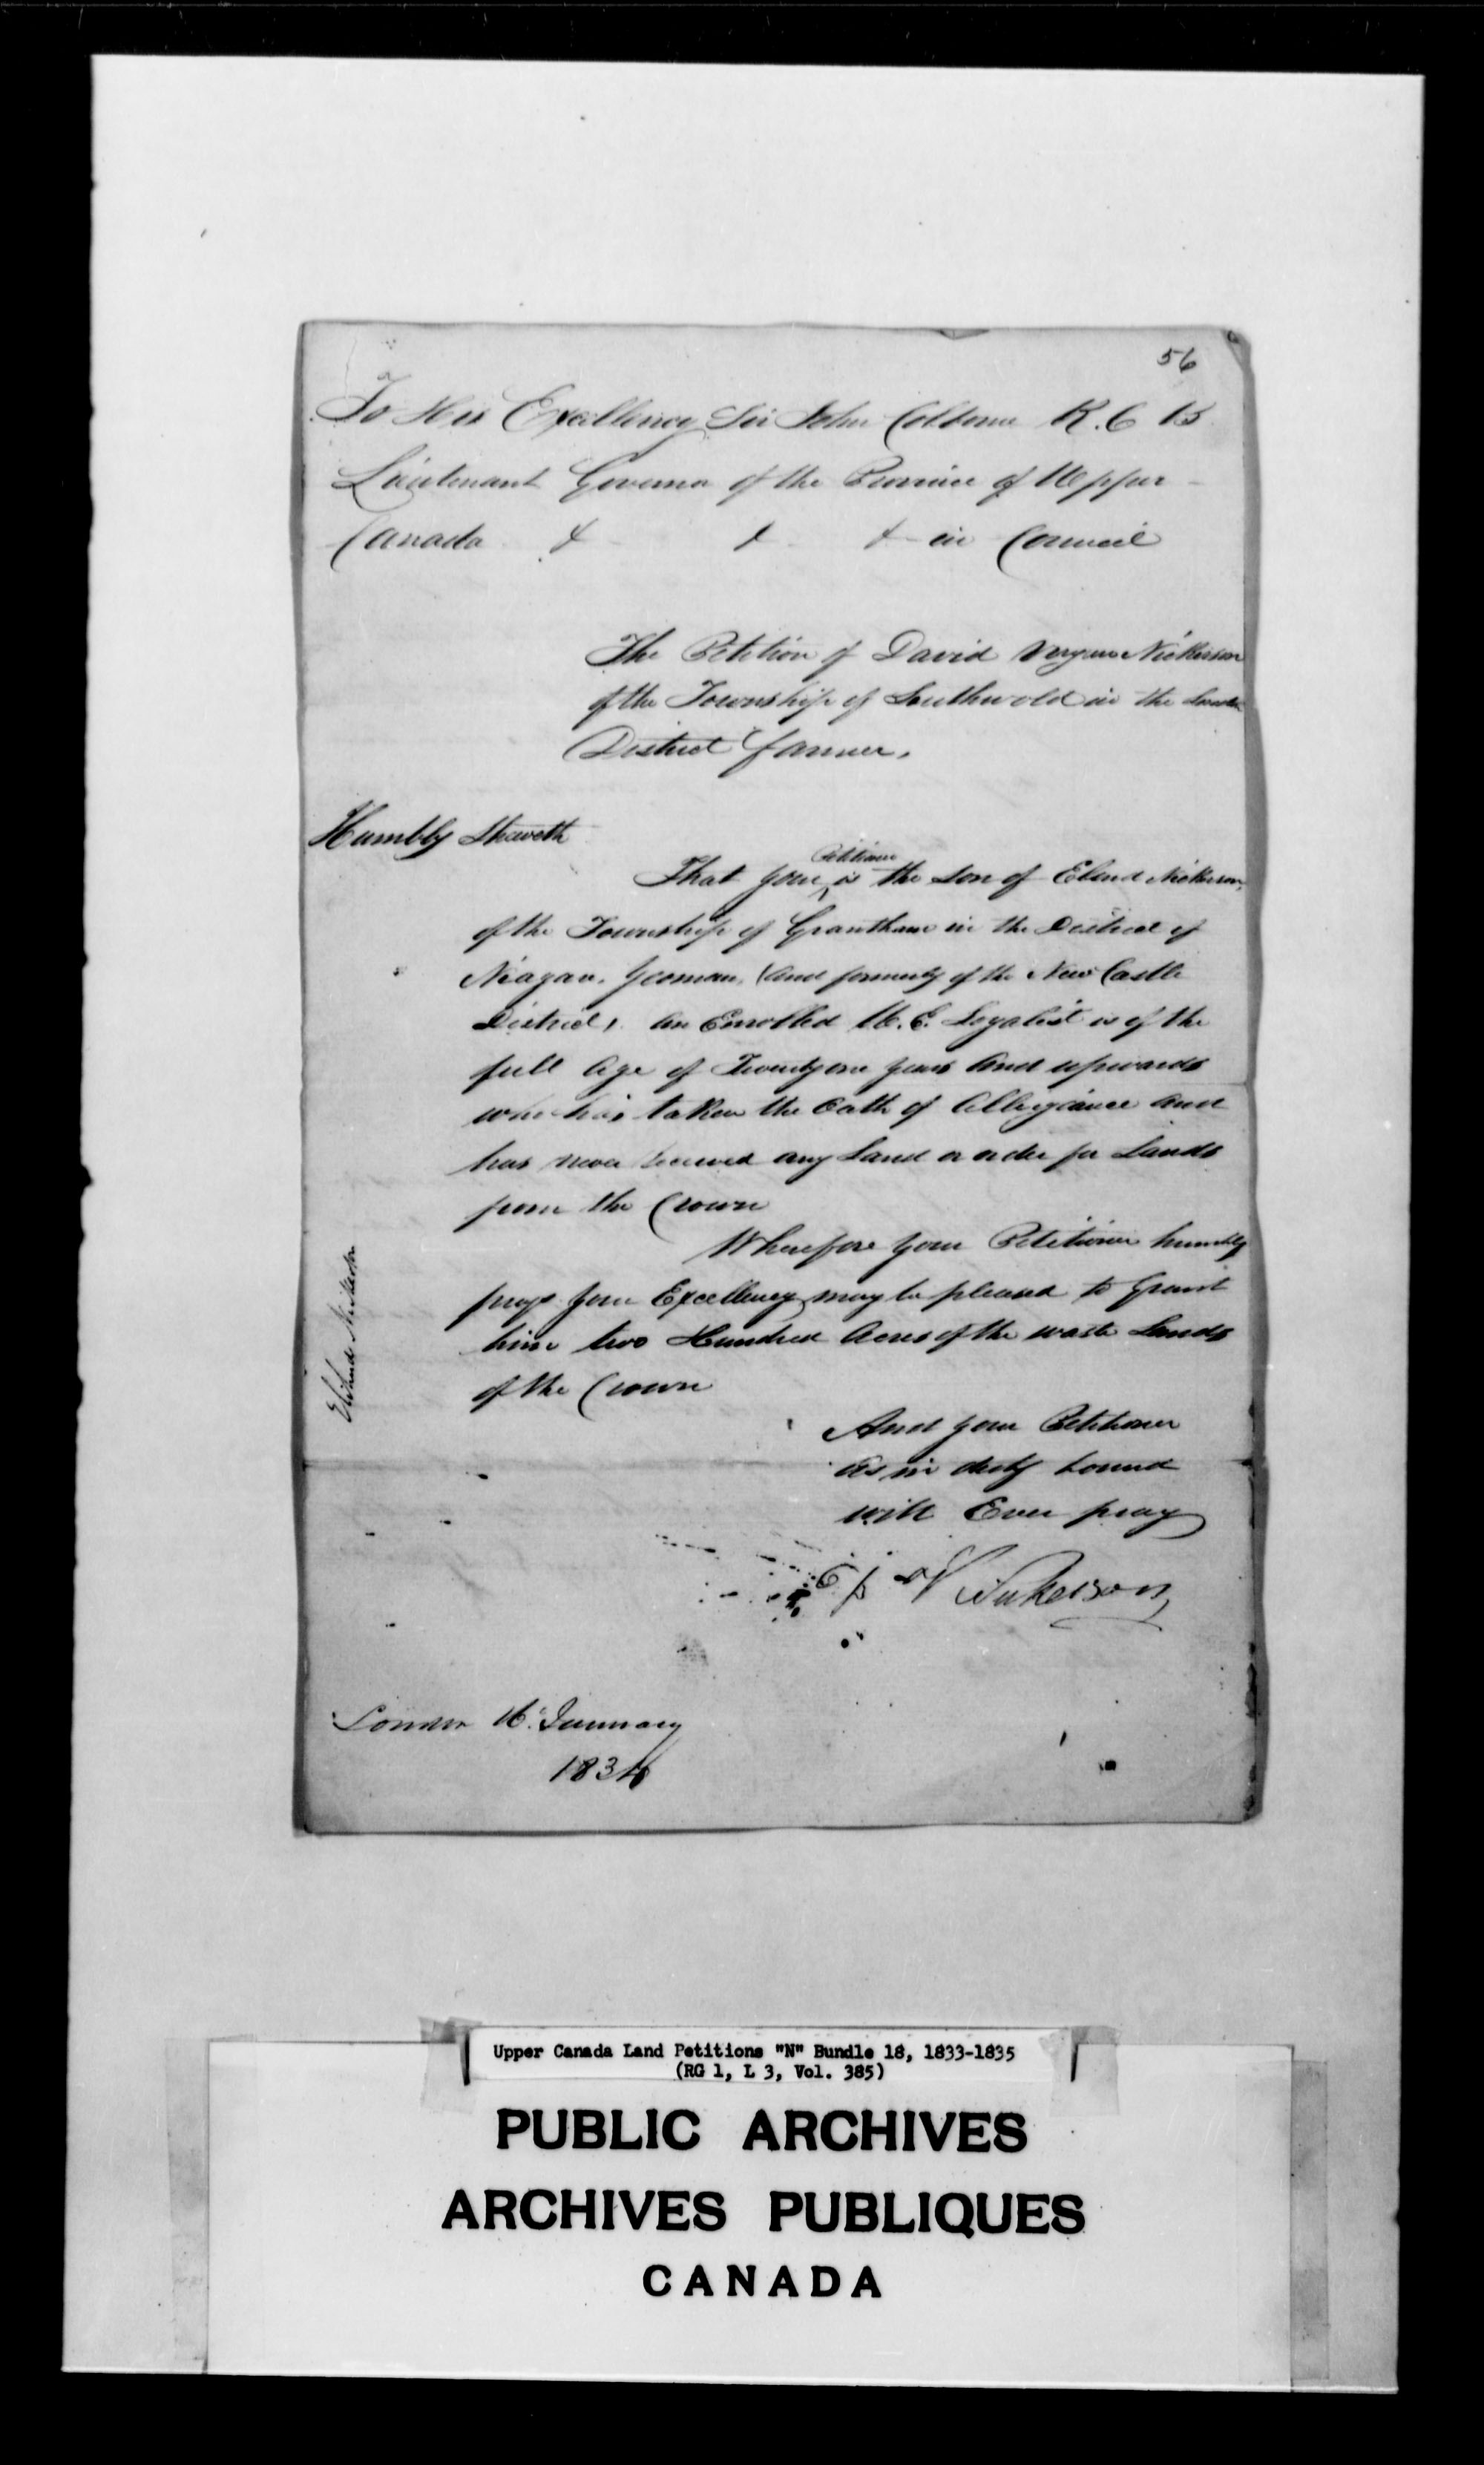 Title: Upper Canada Land Petitions (1763-1865) - Mikan Number: 205131 - Microform: c-2482